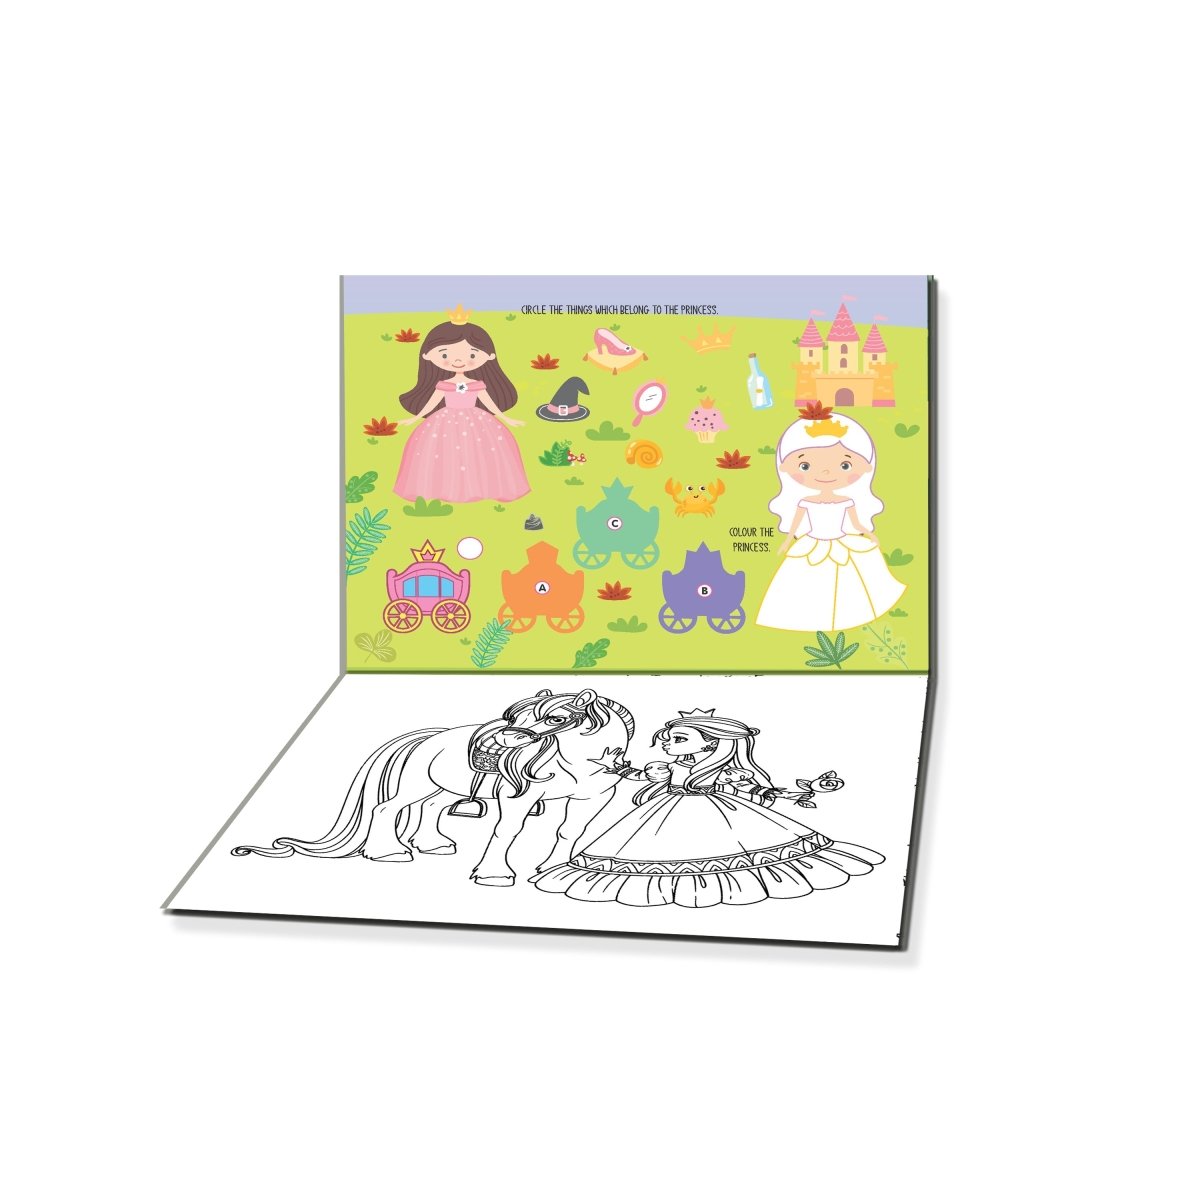 Dreamland Publications Fun With Activity & Colouring Books Pack- A Pack of 4 Books - 9789395588904